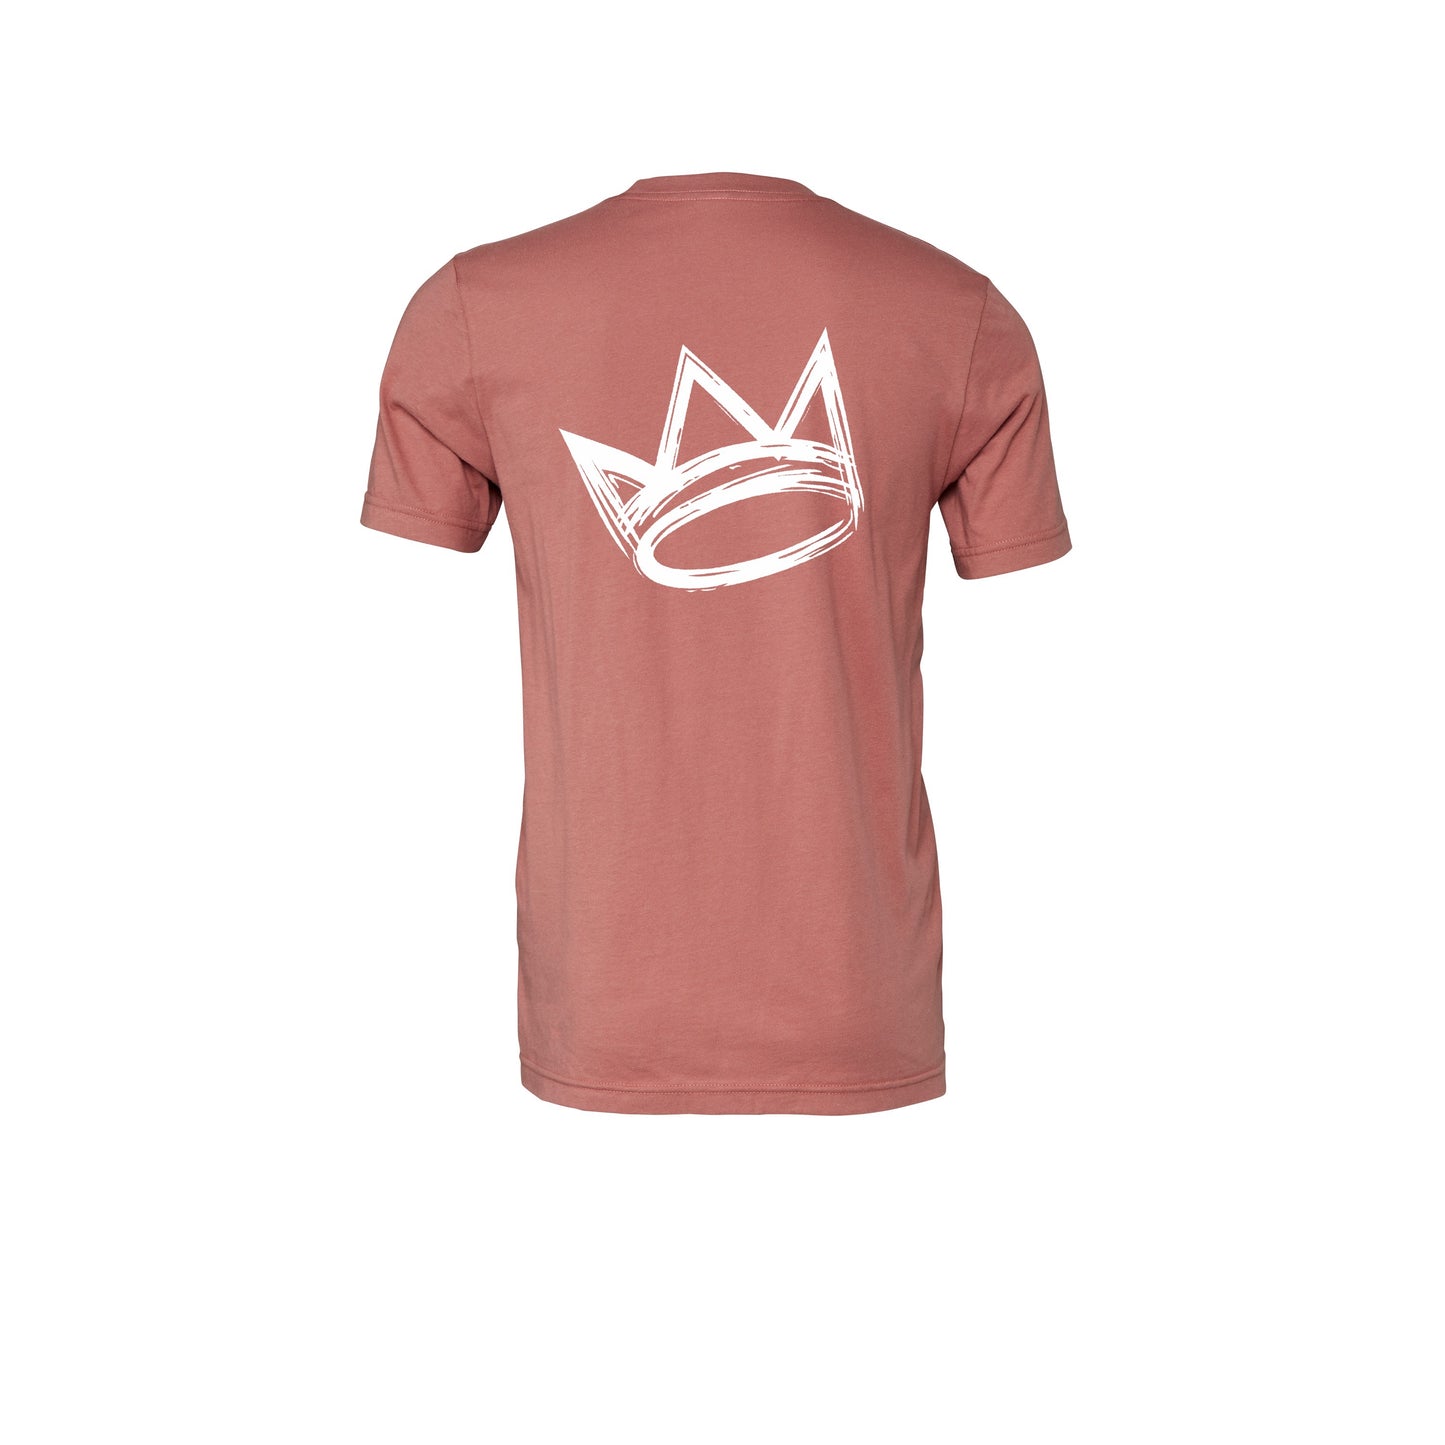 King Crown Collection (Mauve Short Sleeve T-Shirt White Crown)